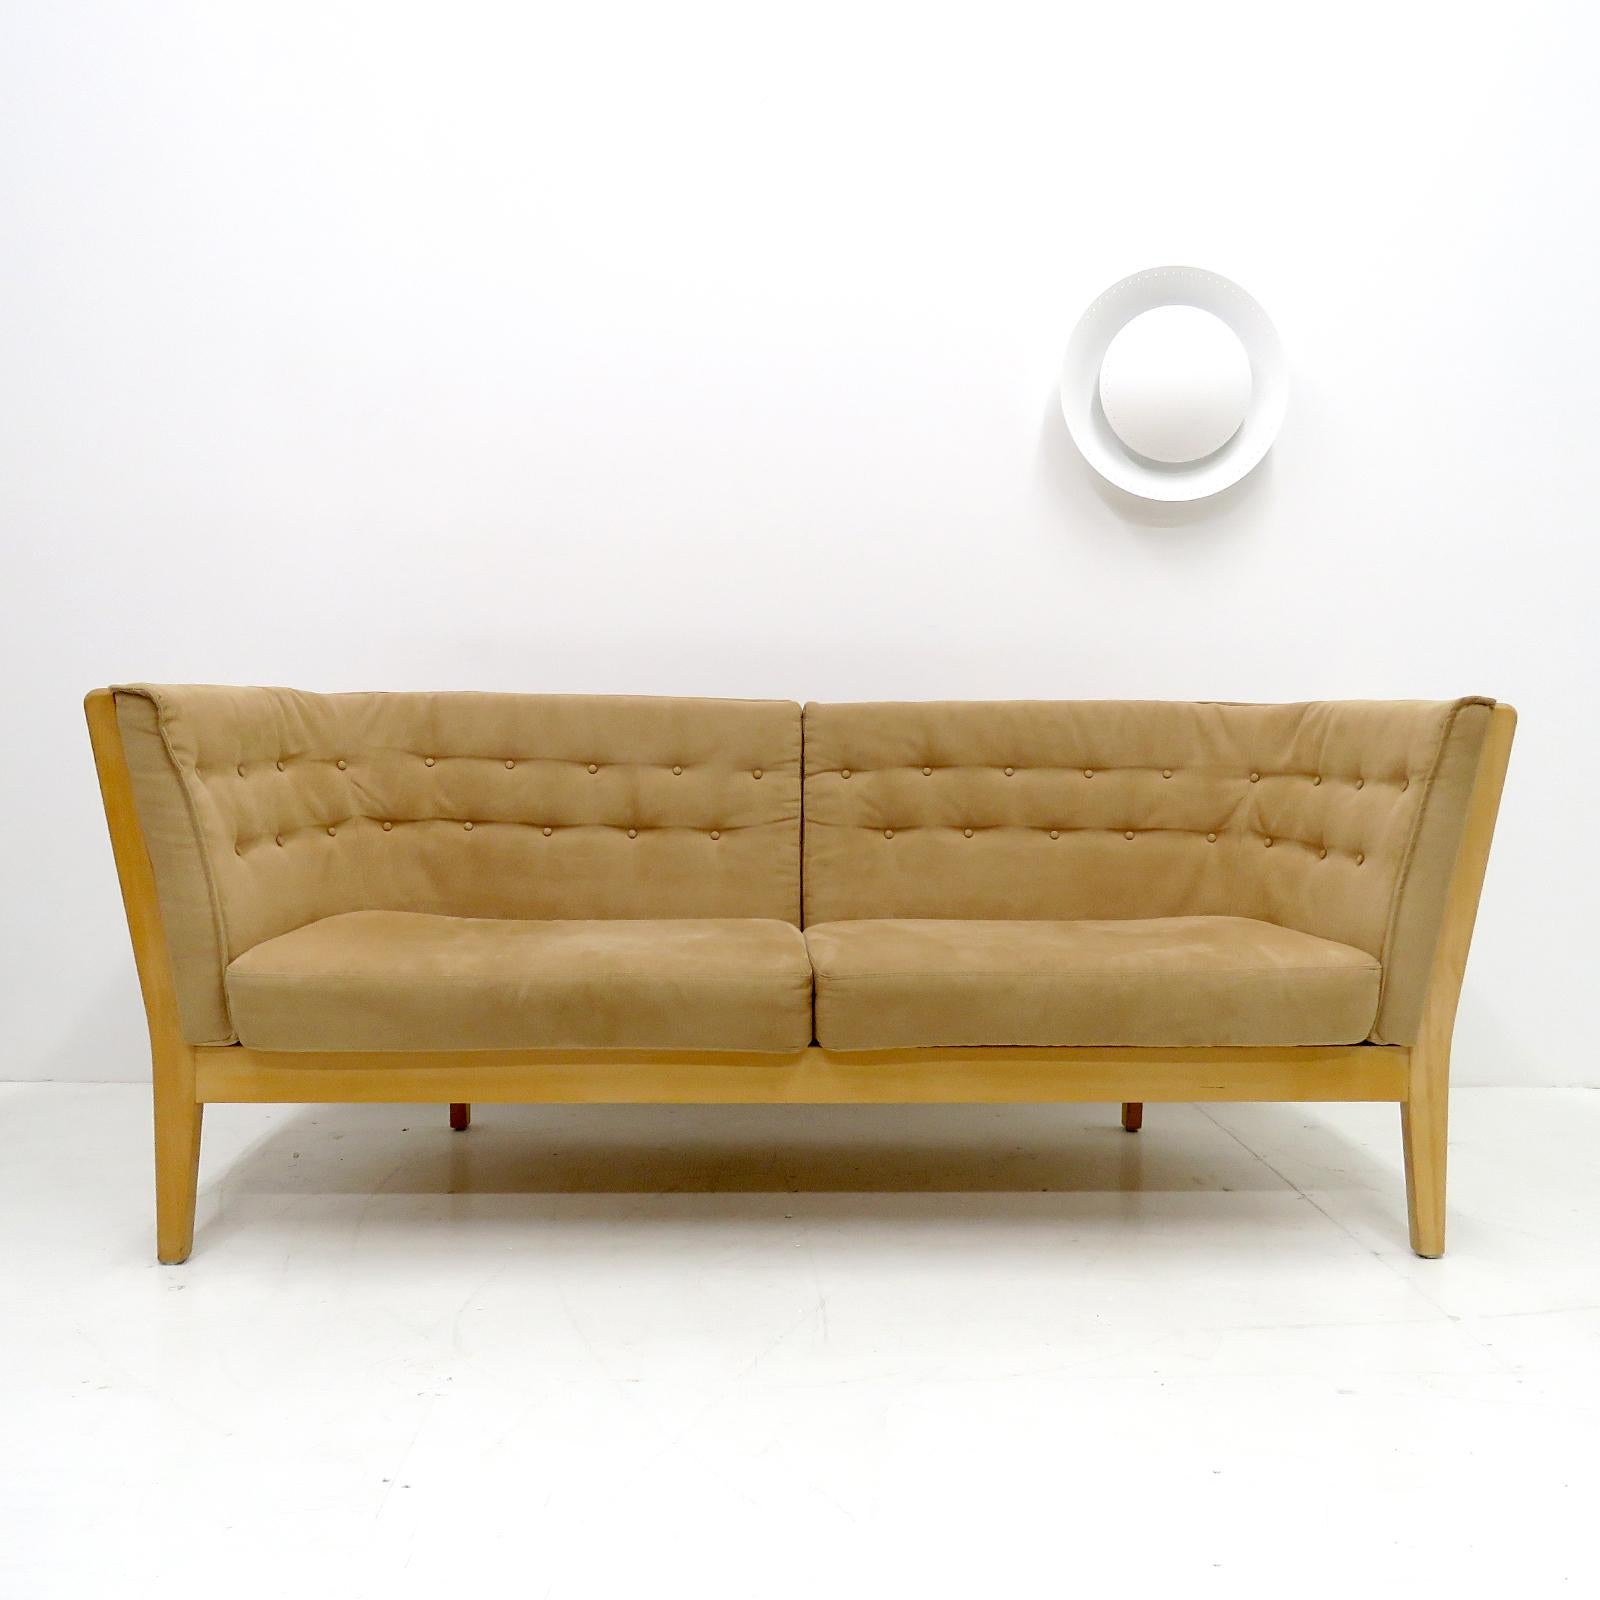 Wonderful Danish modern three seater sofa 'Maria', designed by Wojtek Depka Carstens for Stouby Mobler, with solid soap-treated beech wood frame and upholstered with tufted beige/camel colored alcantara (suede).